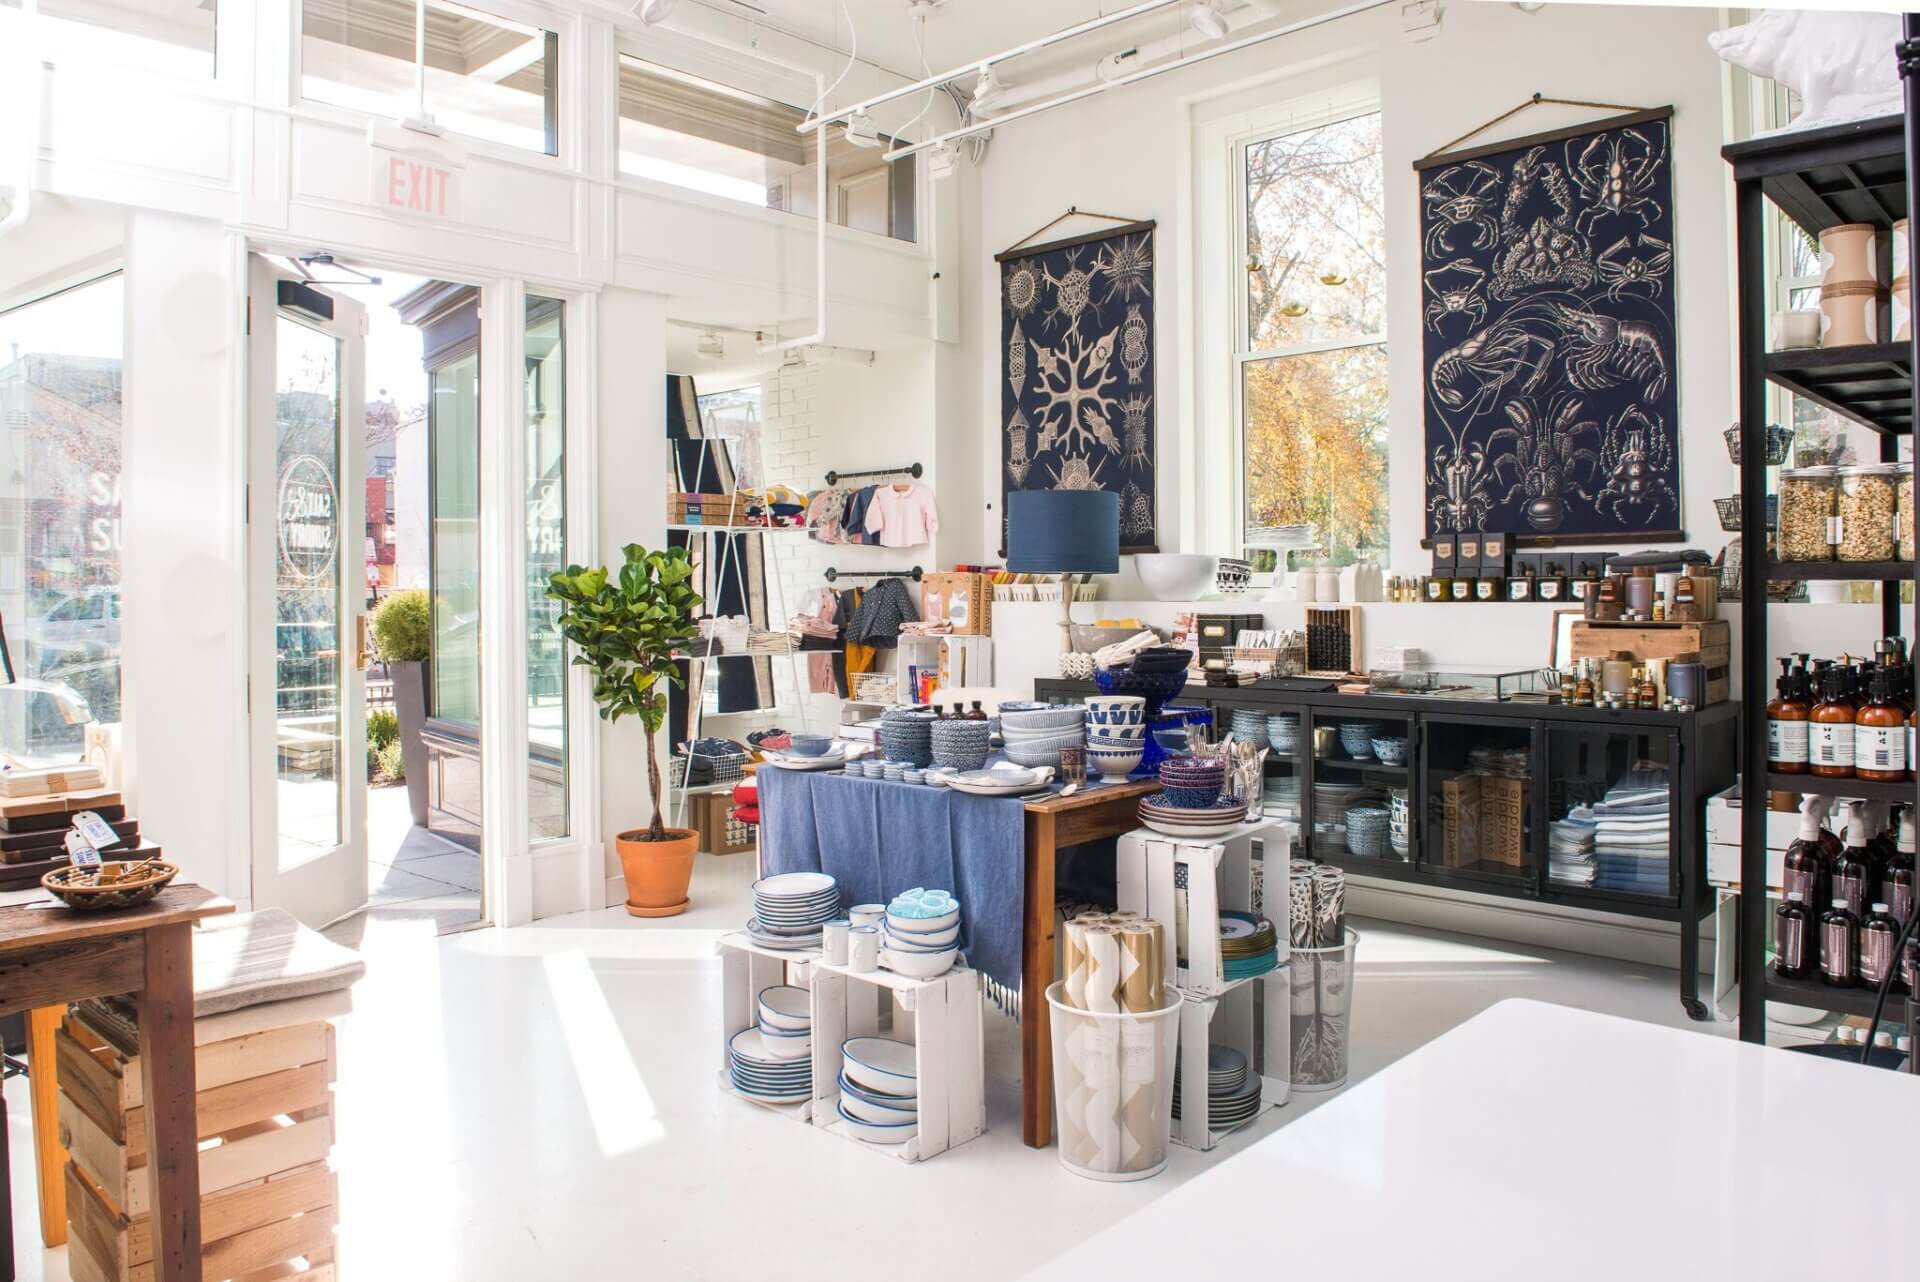 Cute store interior with home goods and tapestries